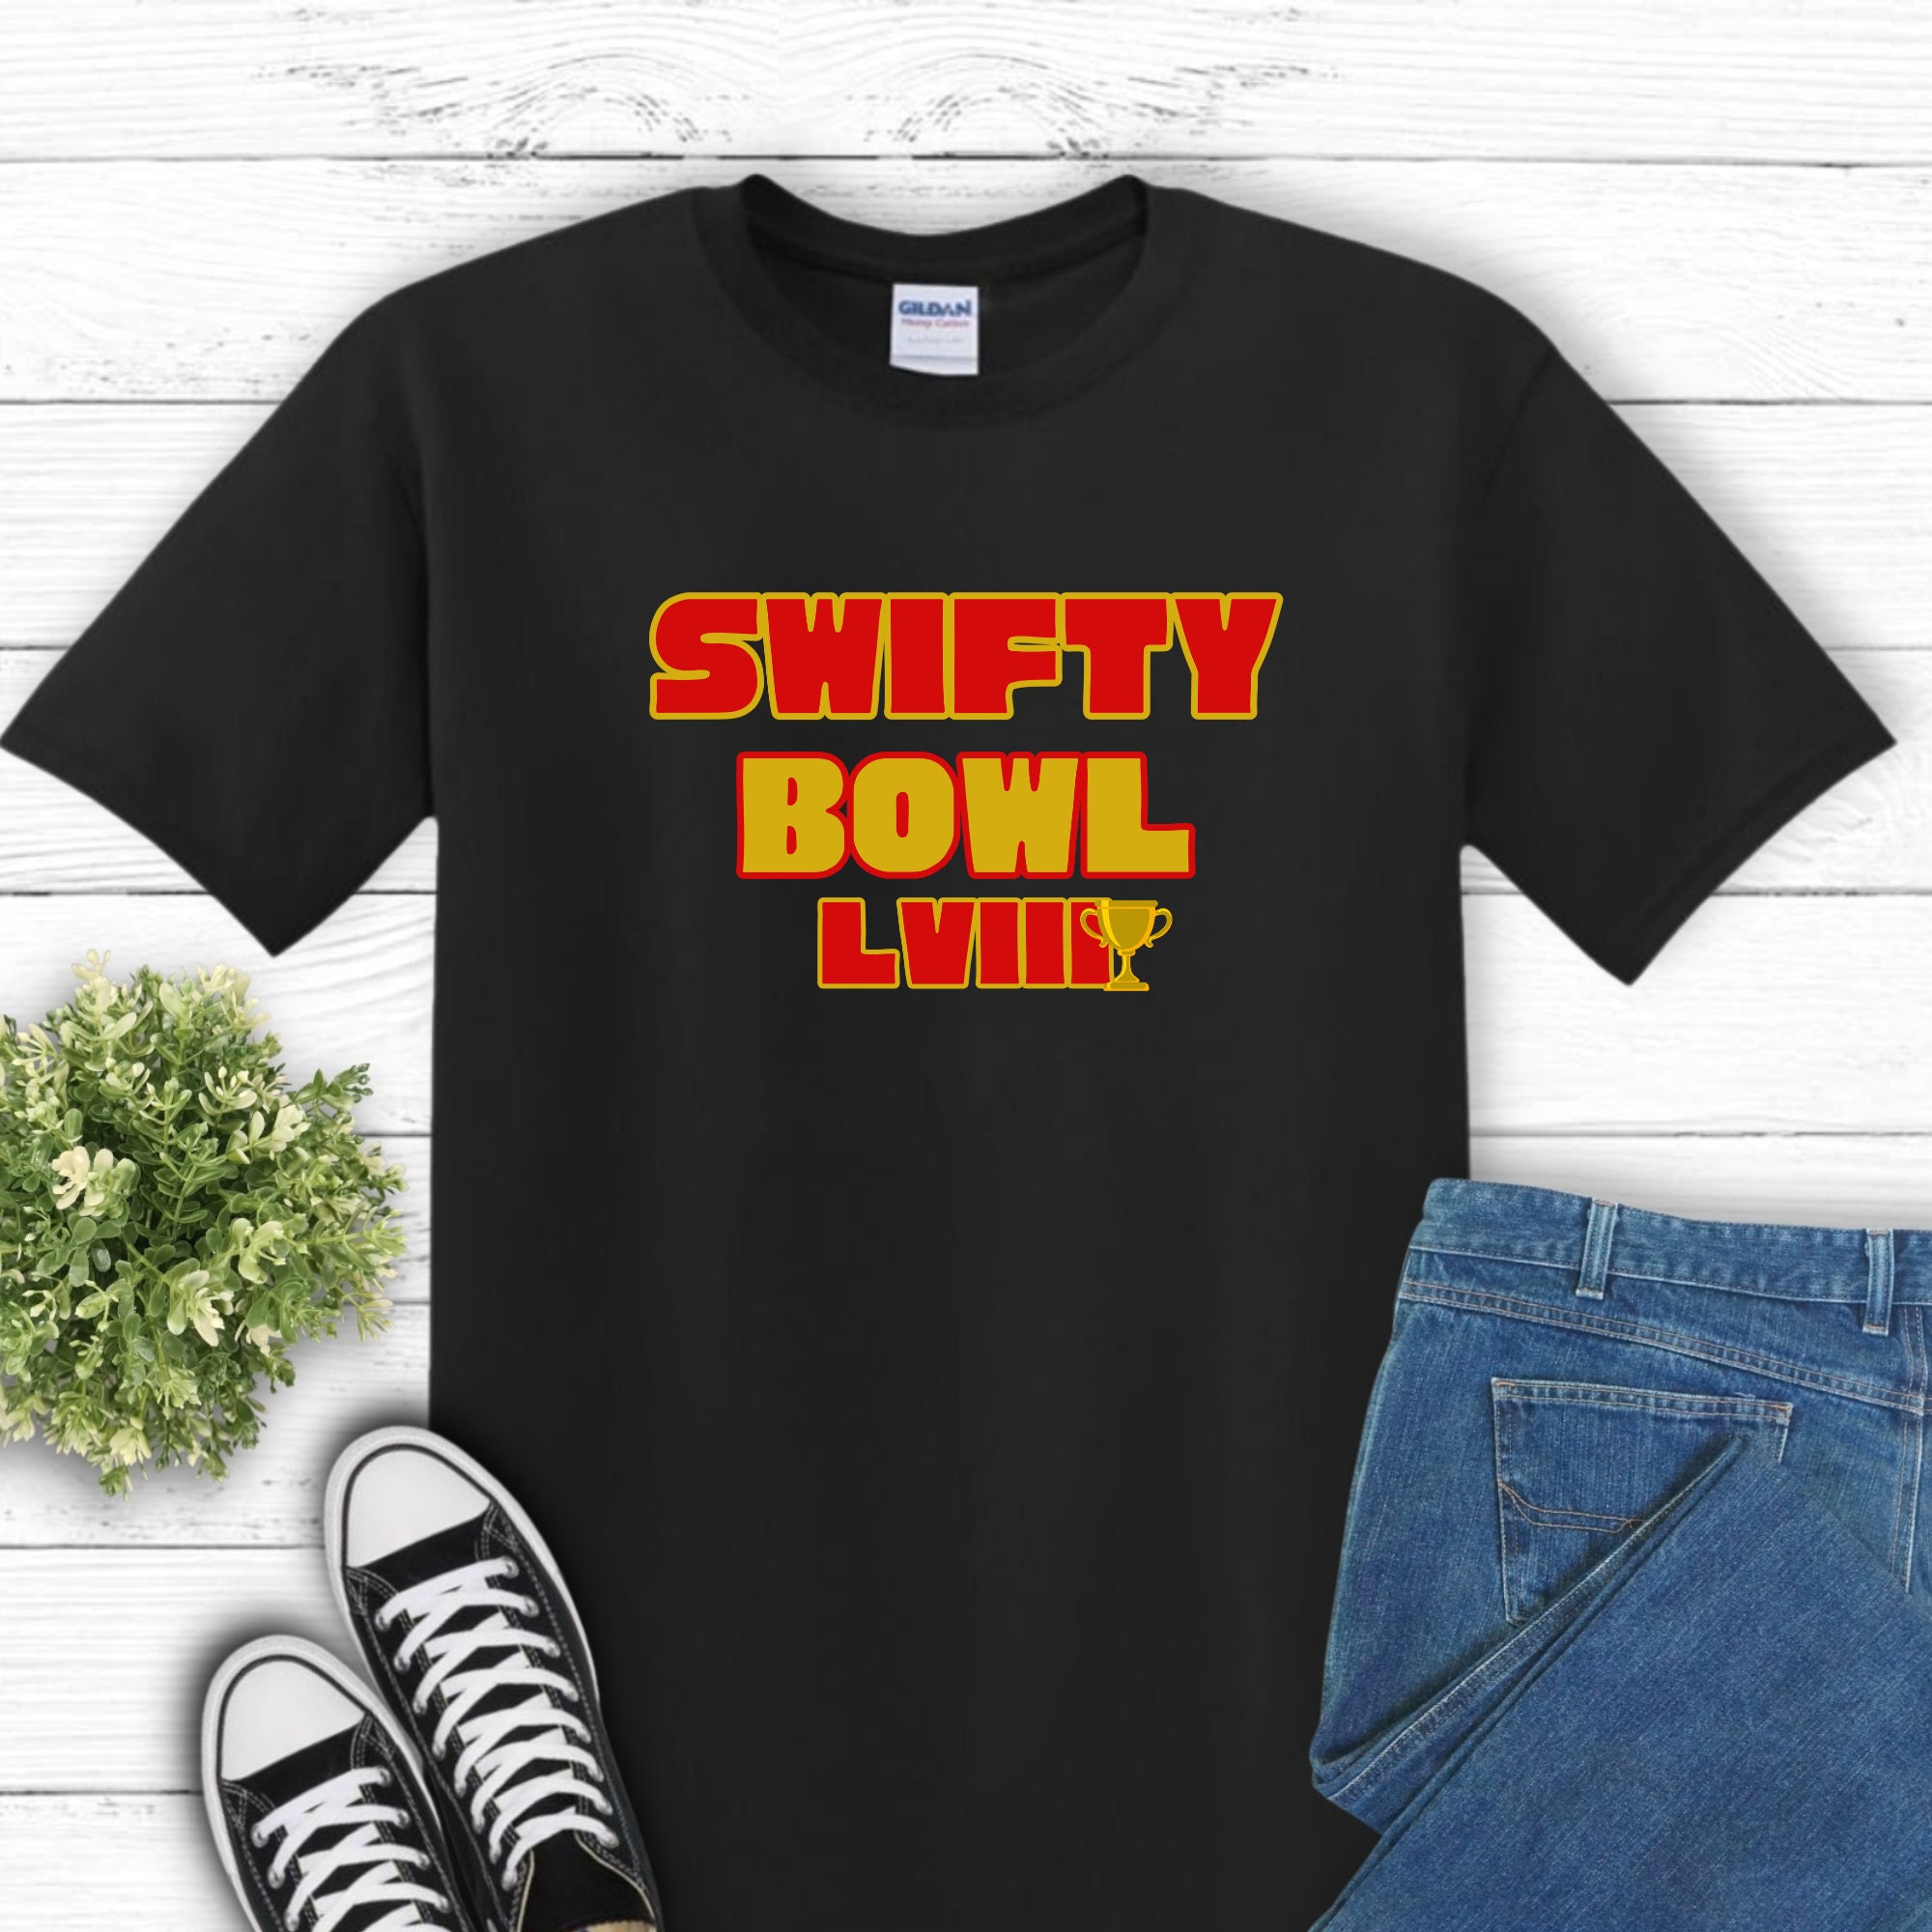 Graphic Printed Taylor Swift Super Bowl Shirt: Swifty Bowl, Chiefs ...